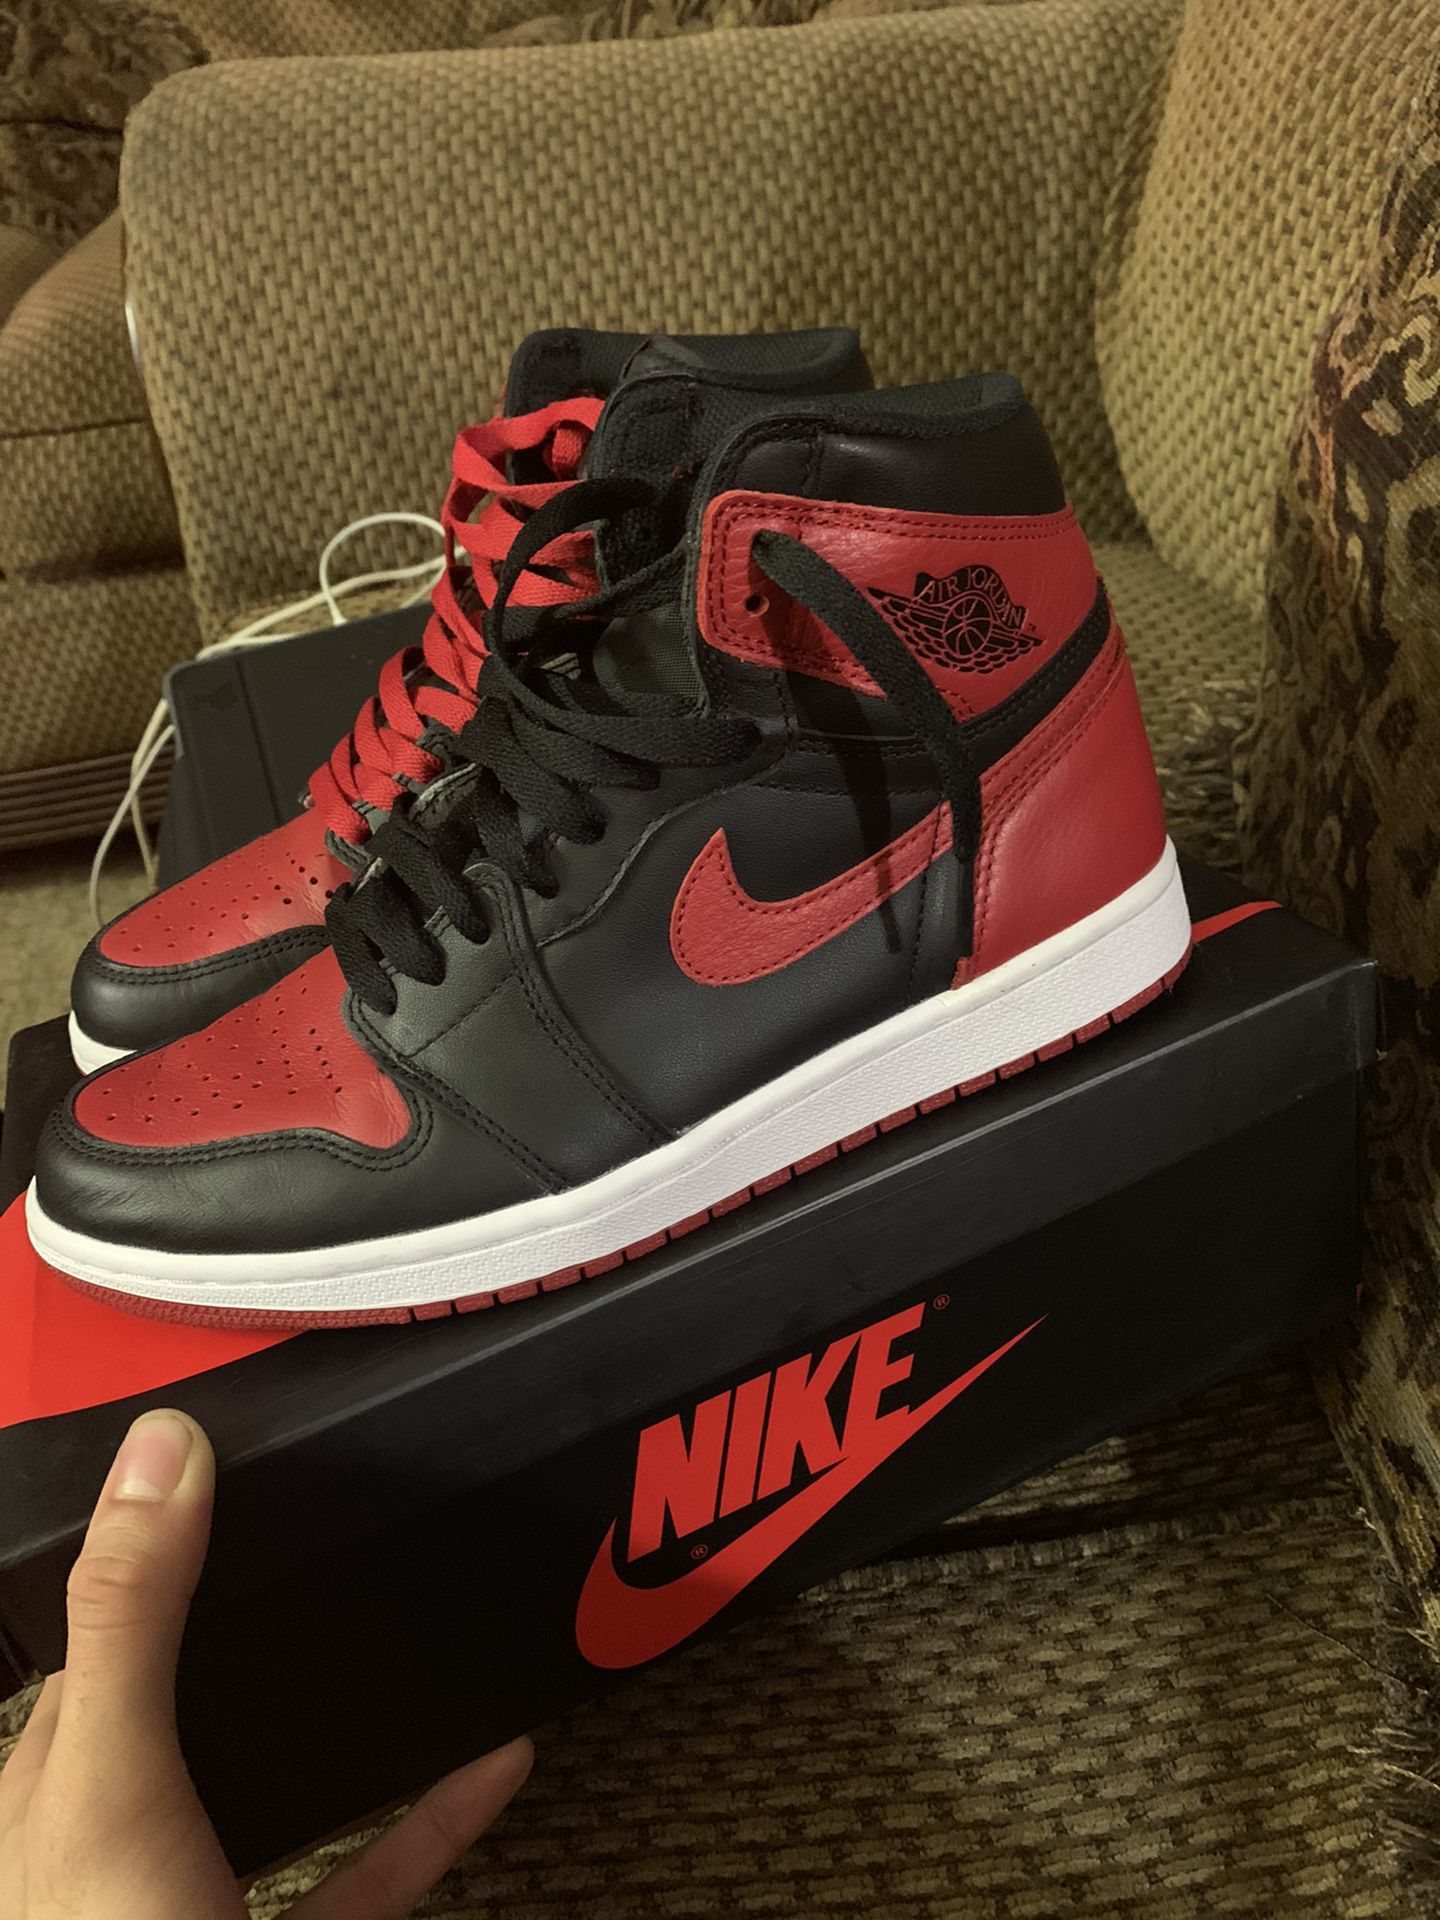 Jordan 1 banned size 8 used 3 times basically brand new so no low balling or trades in heat from 8 to 9 lmk